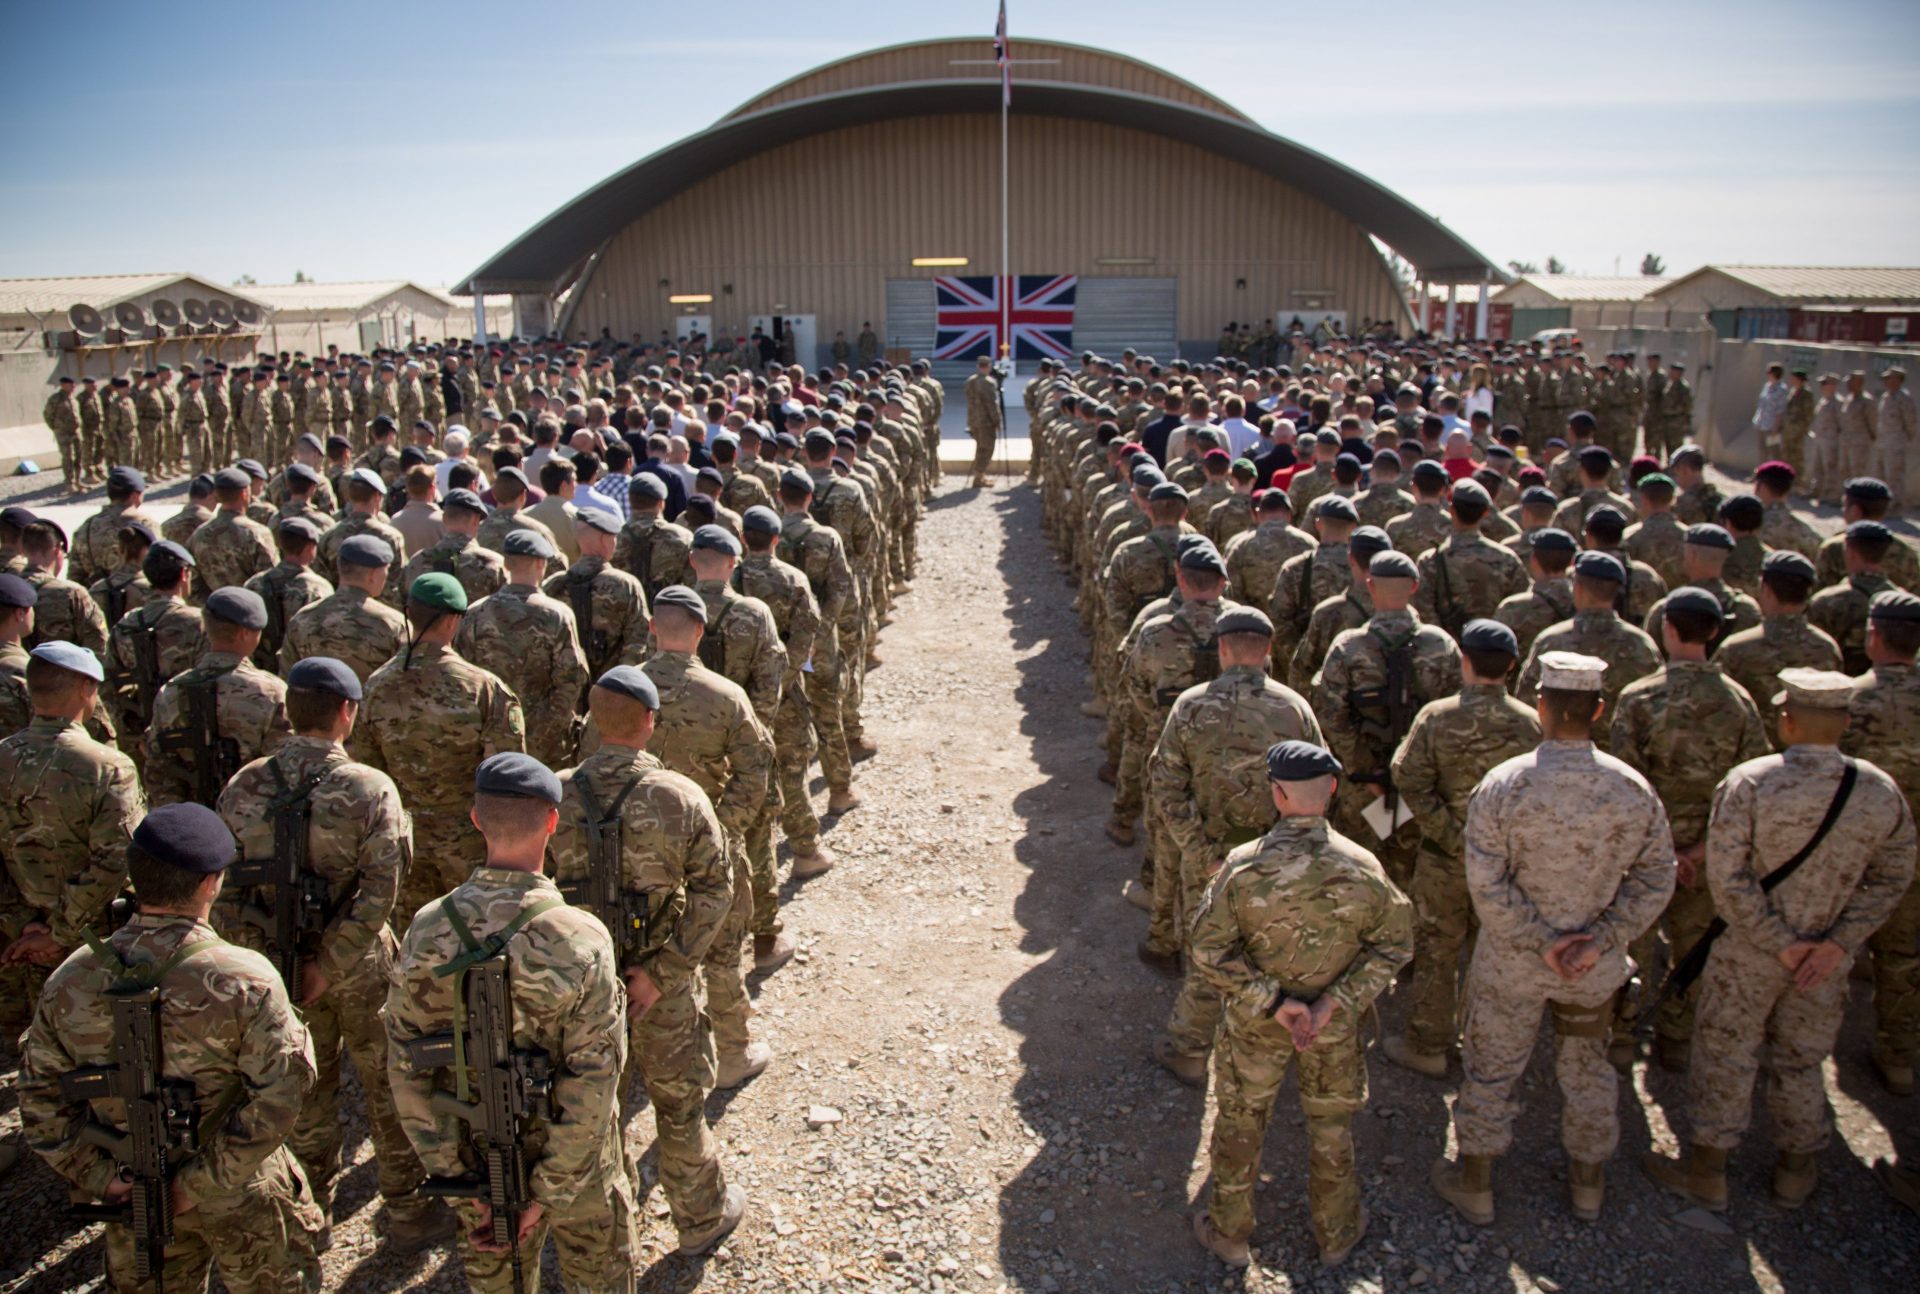 British troops and service personal gather for a Remembrance Sunday service at Kandahar Airfield, November 2014. Photo by Matt Cardy/Getty Images